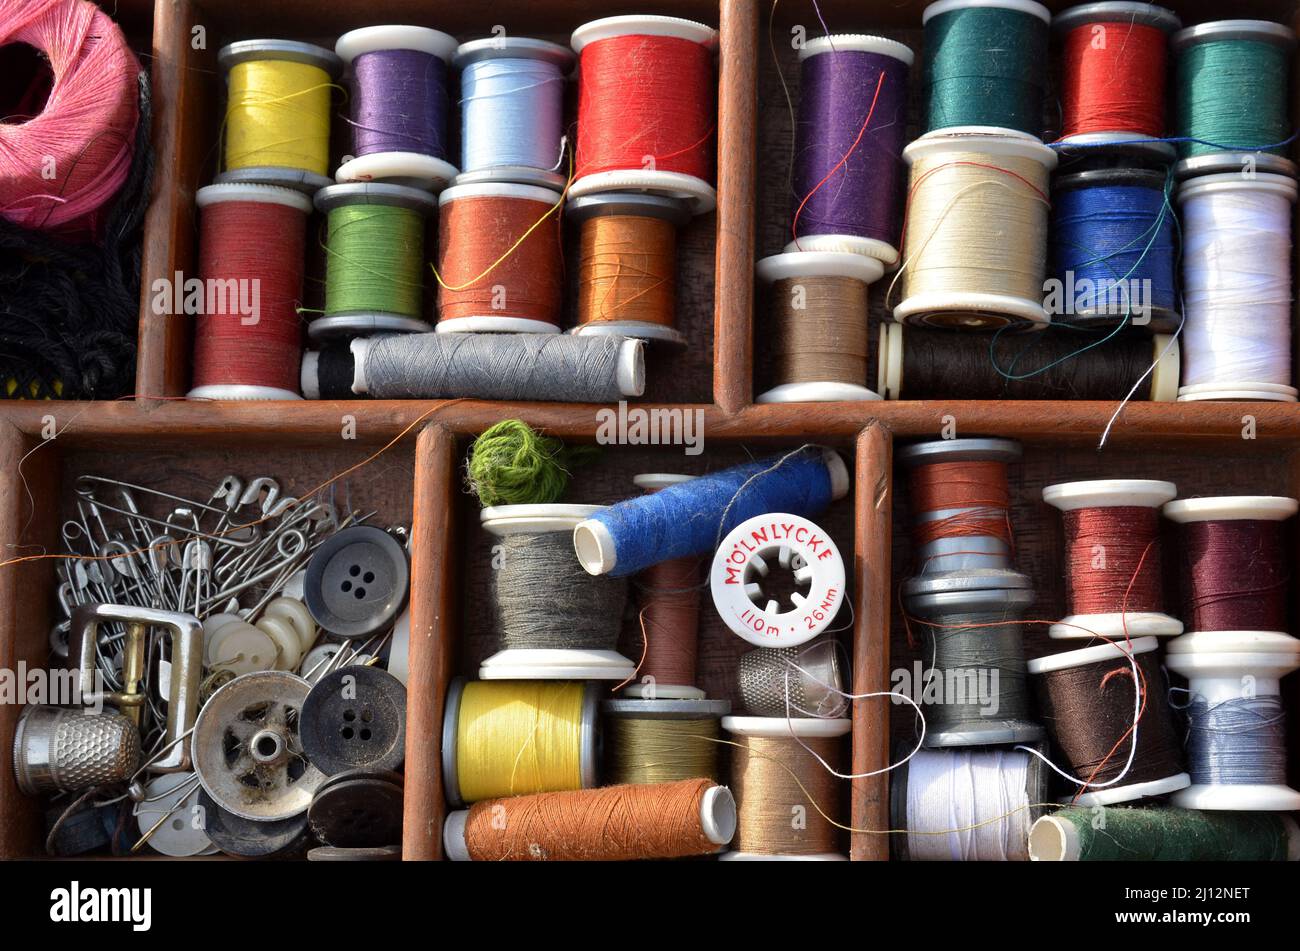 Sonderborg Denmark - March 14, 2022: View into a workbasket with spools of sewing thread in many colours, a M�lnlycke spool is seen. Stock Photo